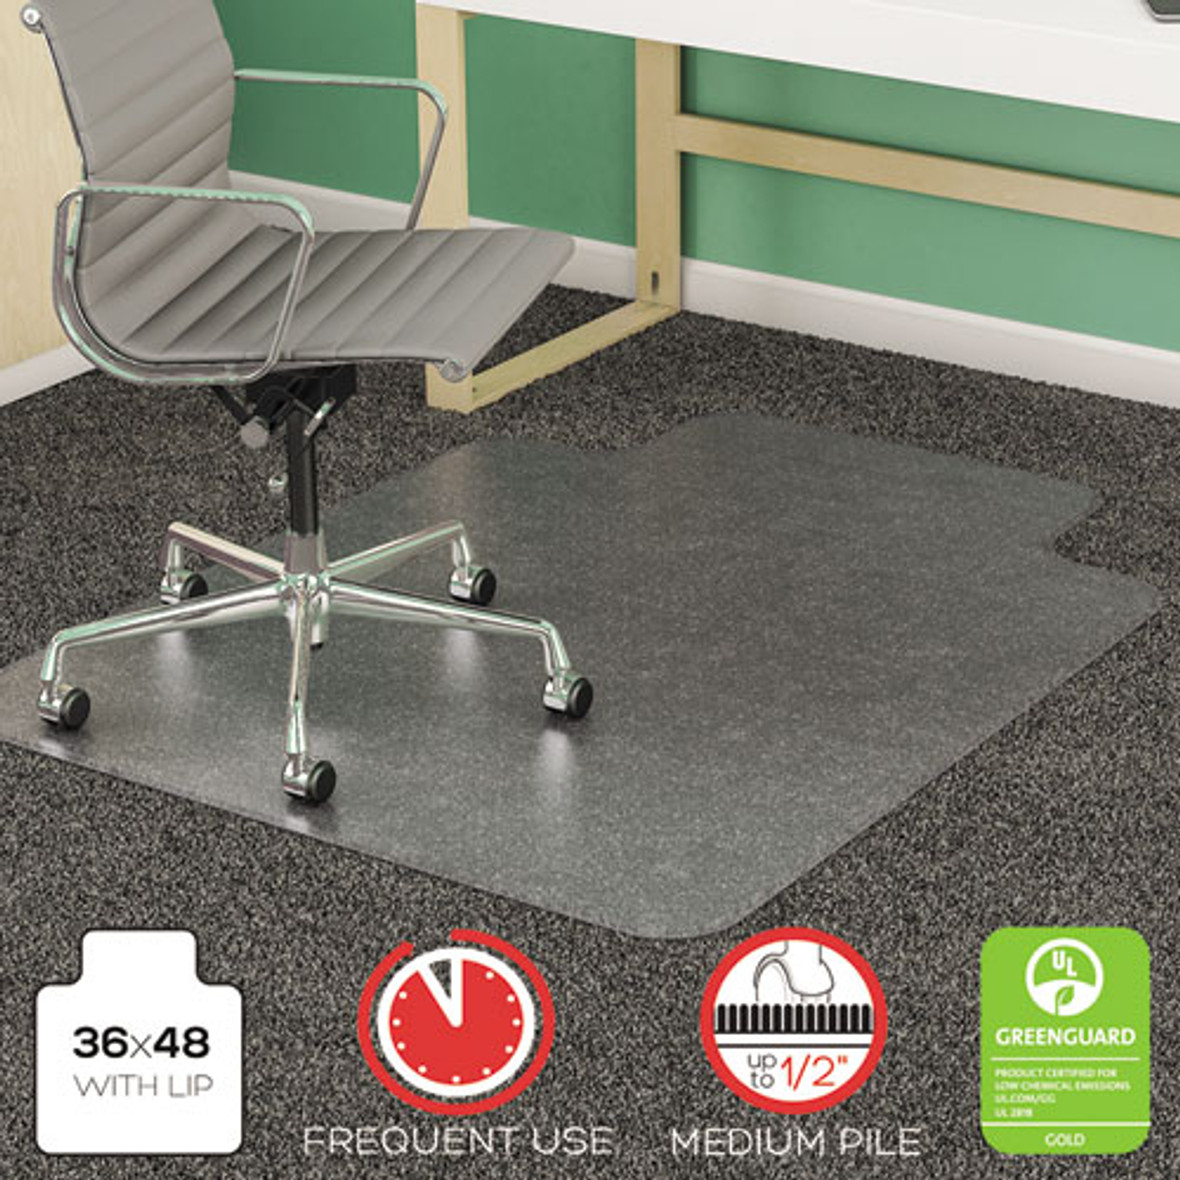 Deflecto® SuperMat Frequent Use Chair Mat, Med Pile Carpet, Flat, 36 x 48, Lipped, Clear, 1 Each/Carton